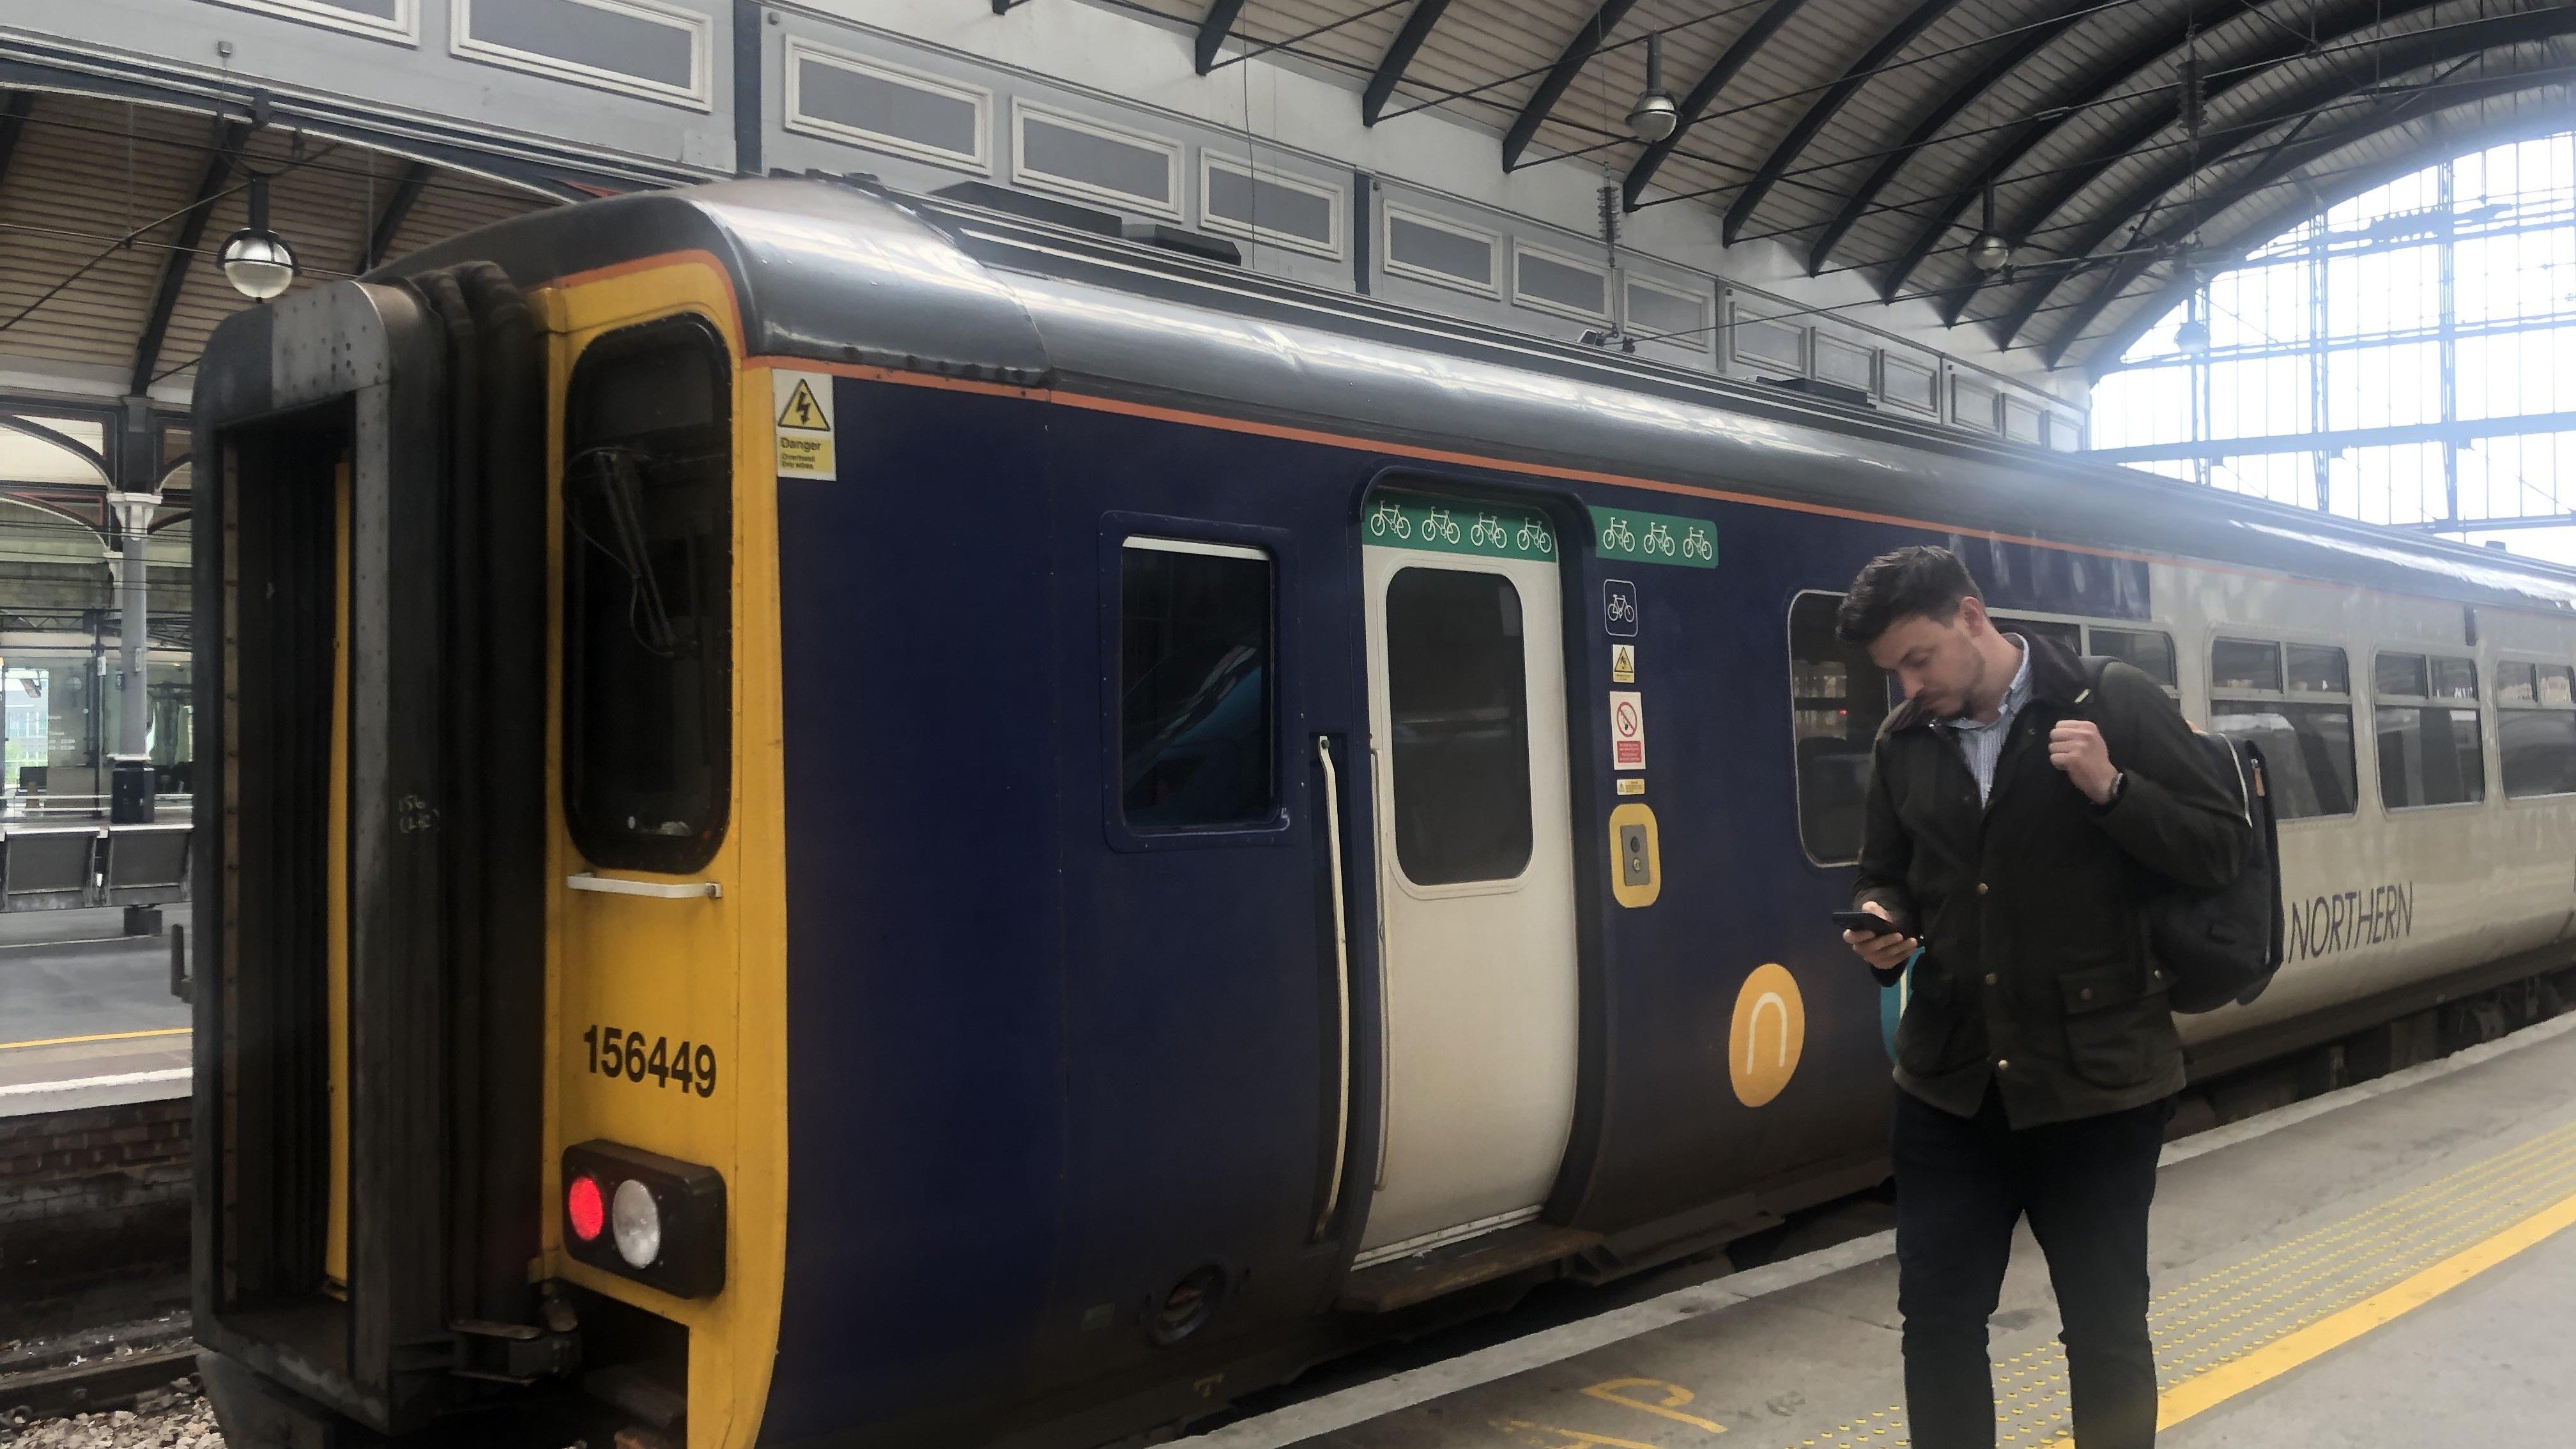 This image shows the new whatsapp service being used next to a Northern train